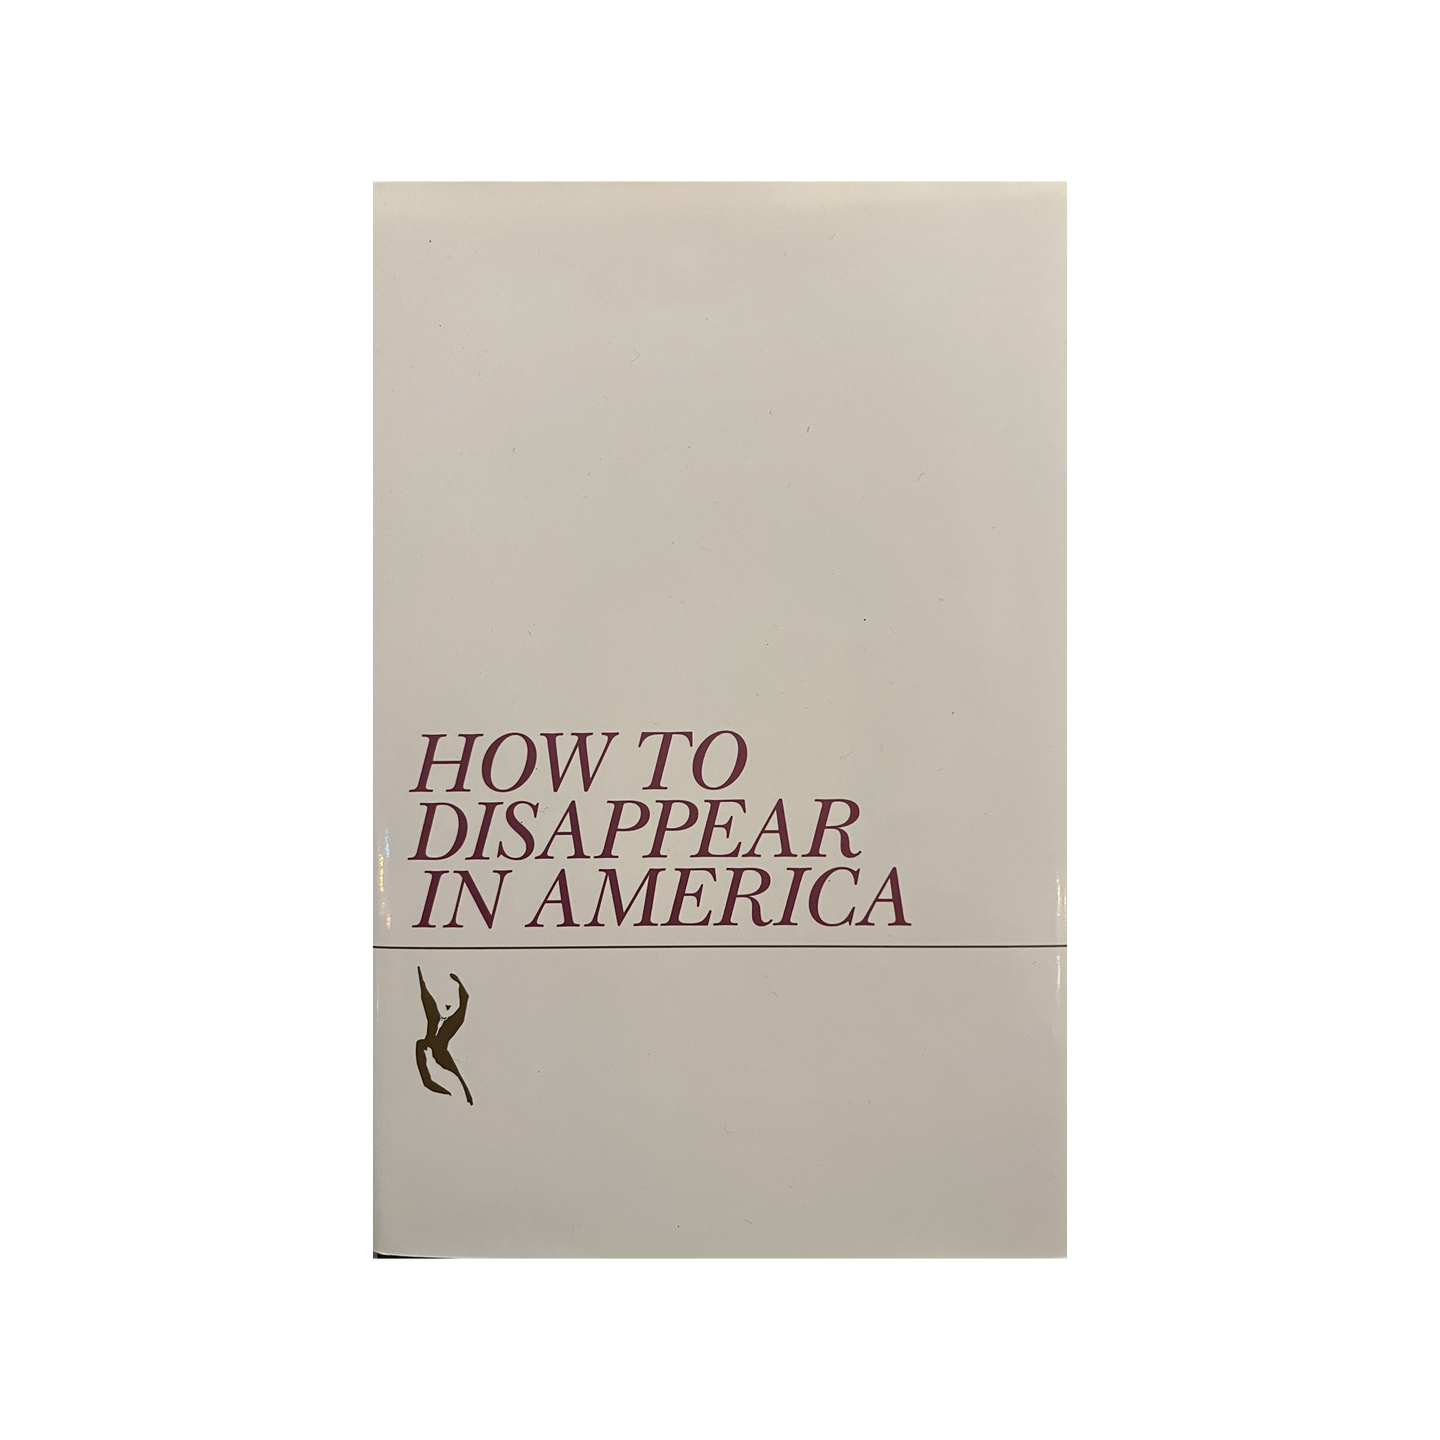 How to Disappear in America by Seth Price